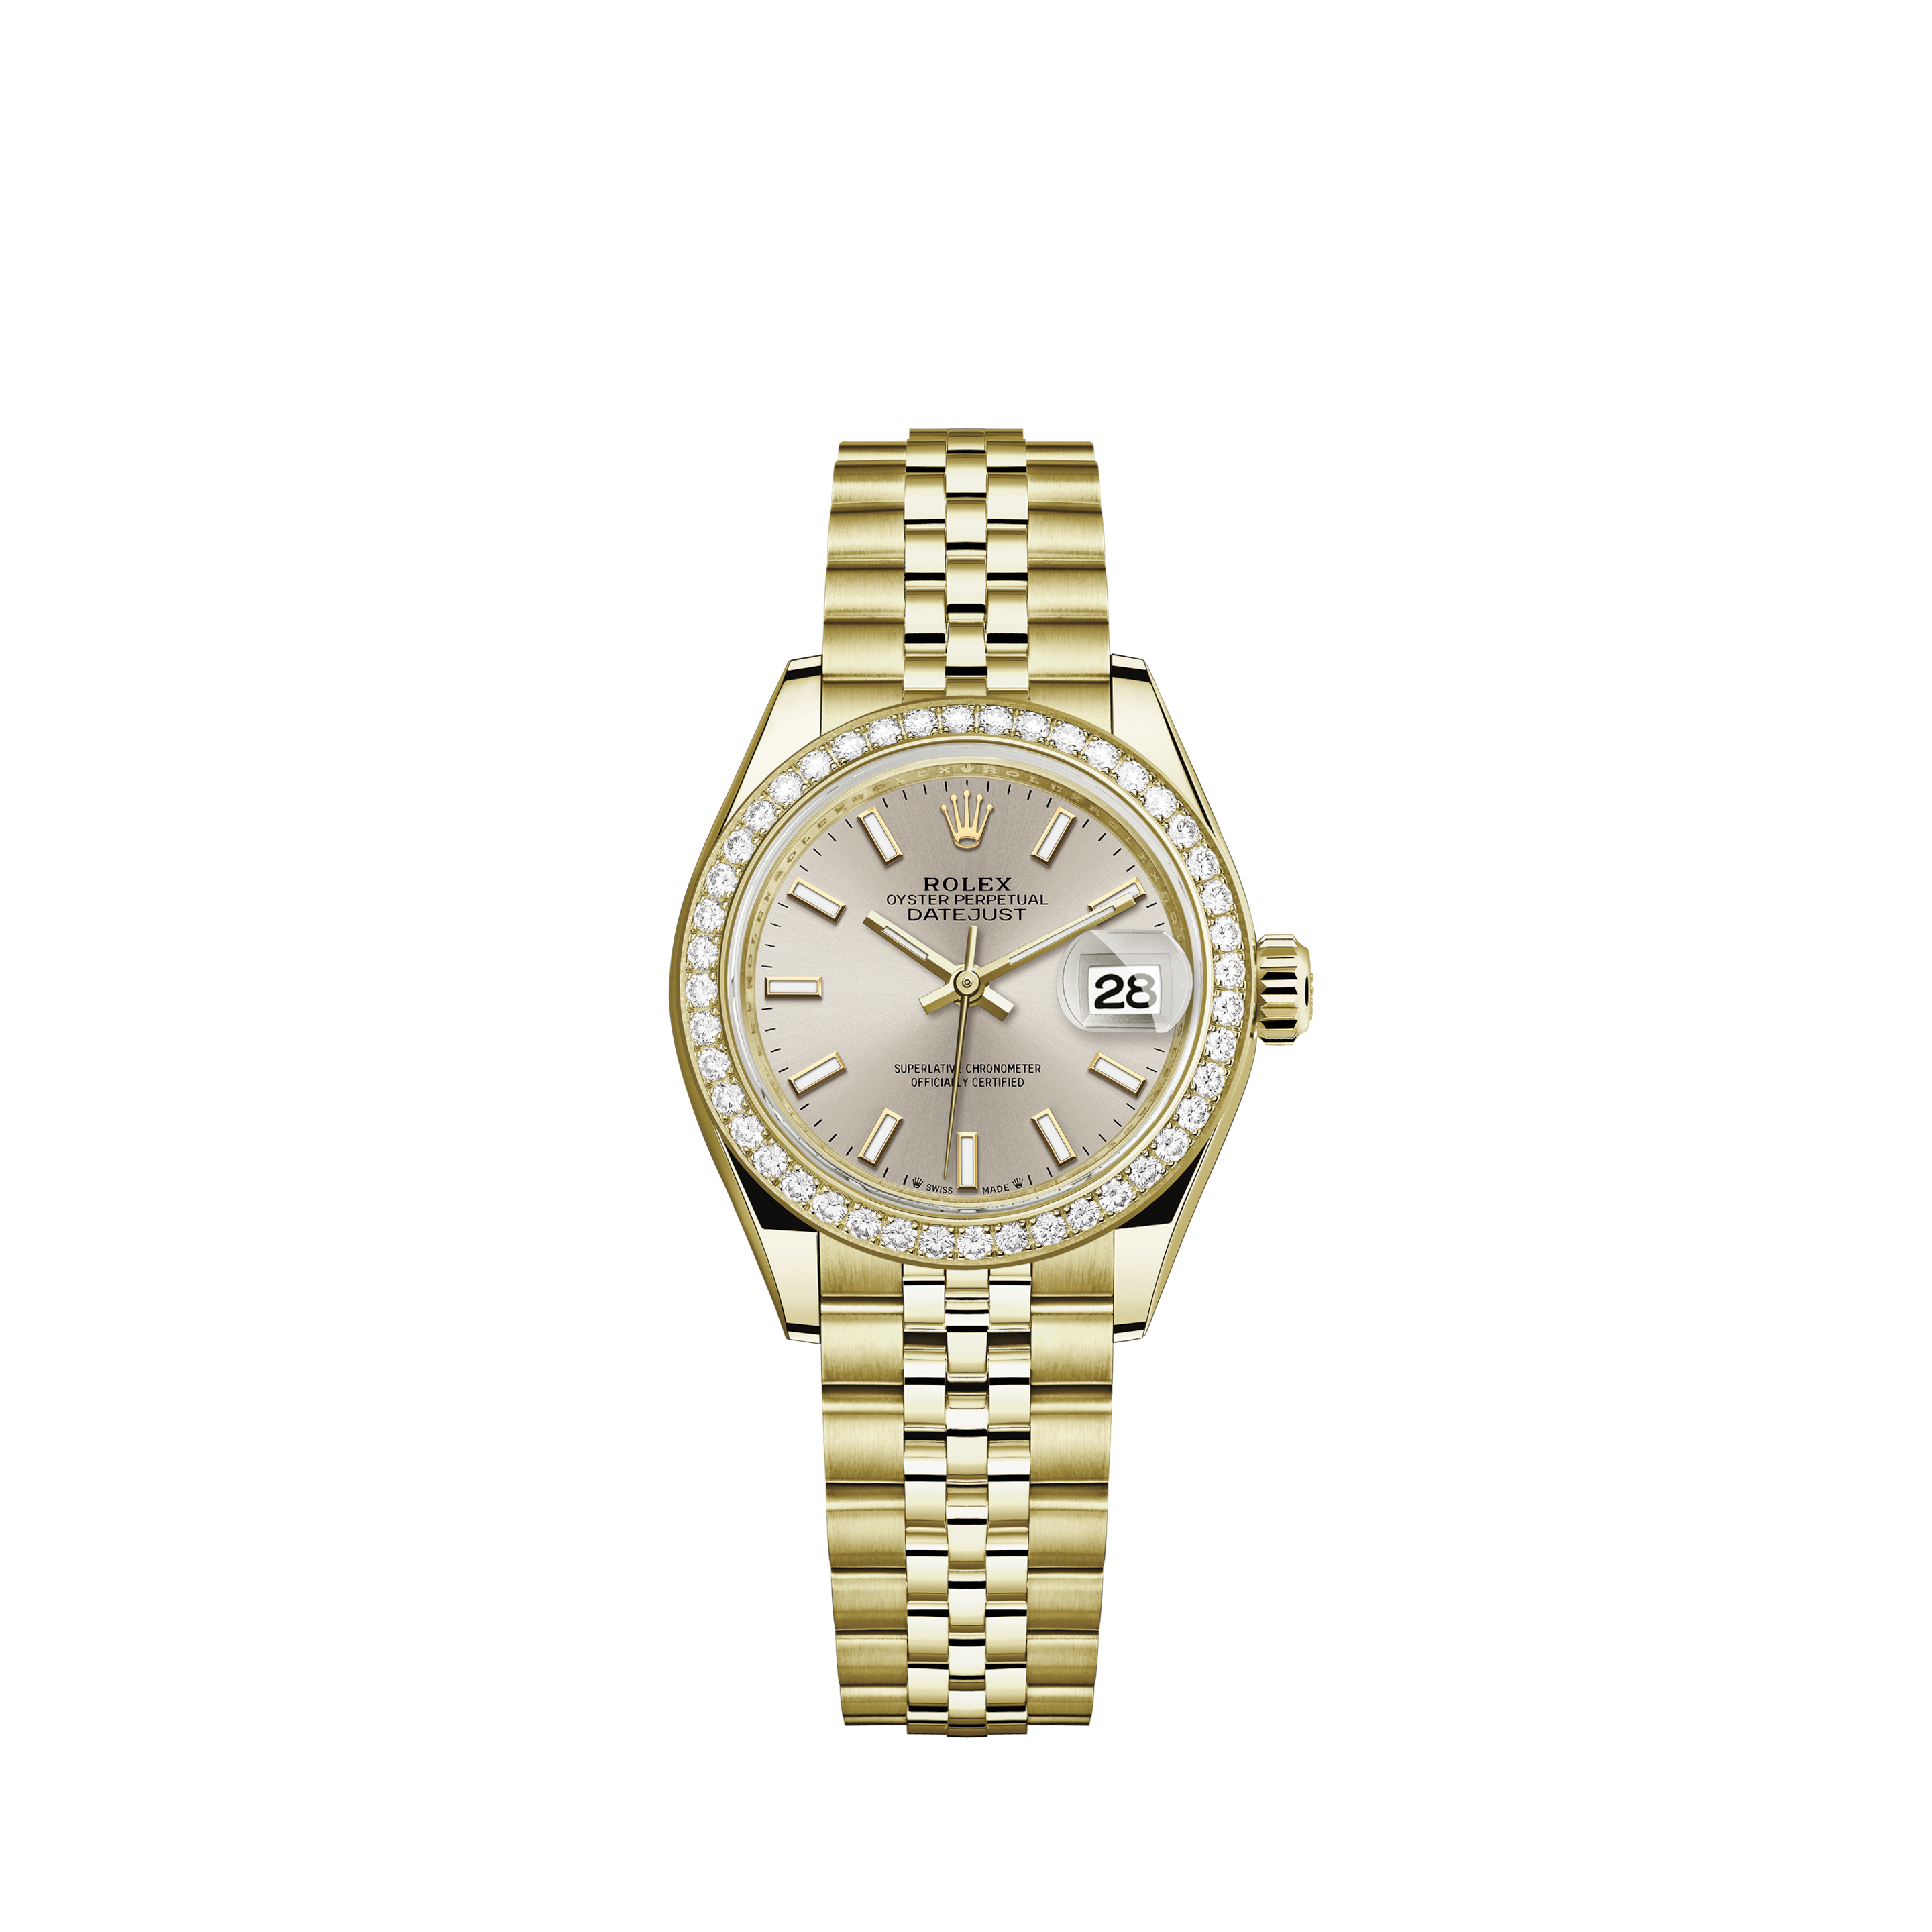 Rolex Datejust 36 FULL SET 09/2021 unworn box papersRolex Datejust 36 Factory Champagne Jubilee Diamond Dial Fluted Boxes Books SS/18kt Solid Gold